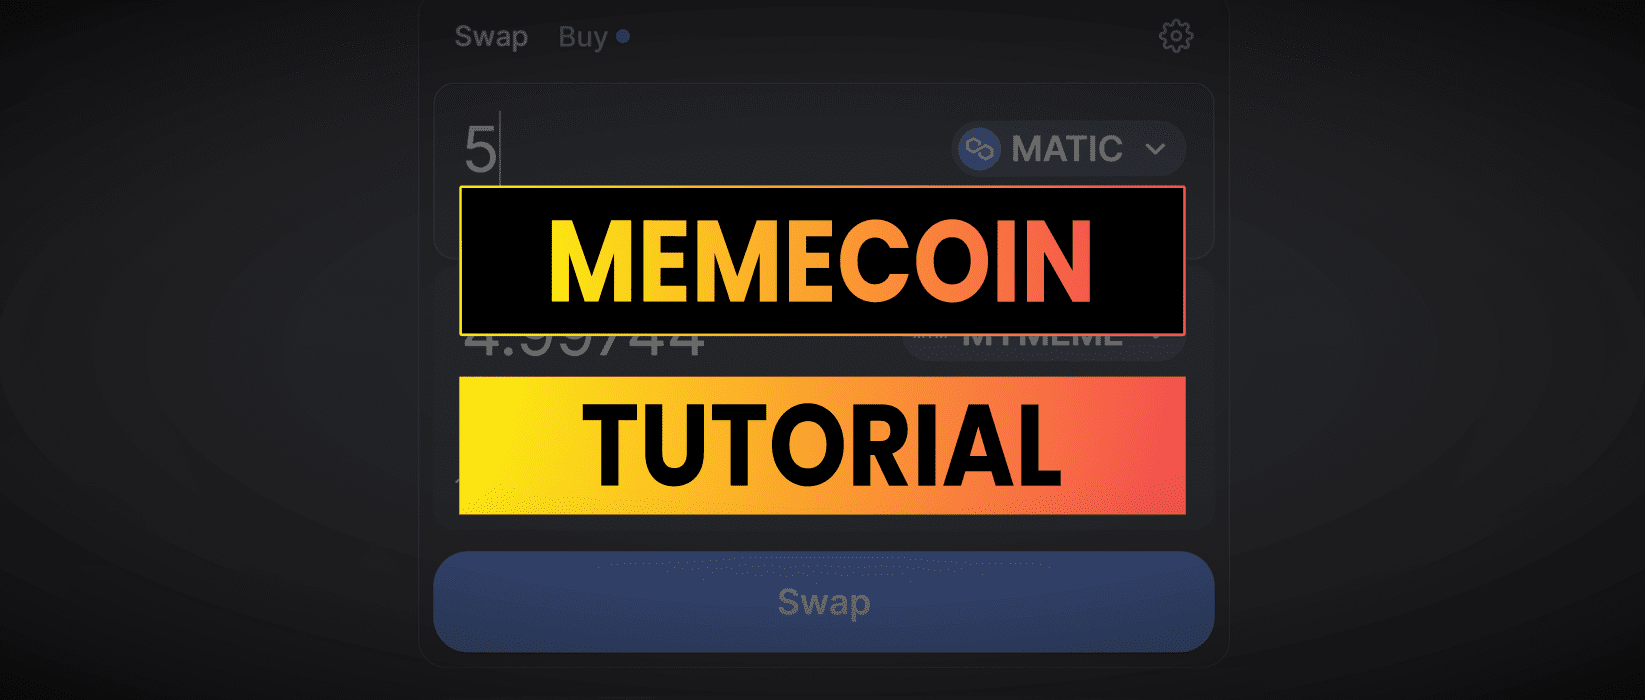 How To Create Your Own Memecoin With Solidity and Uniswap